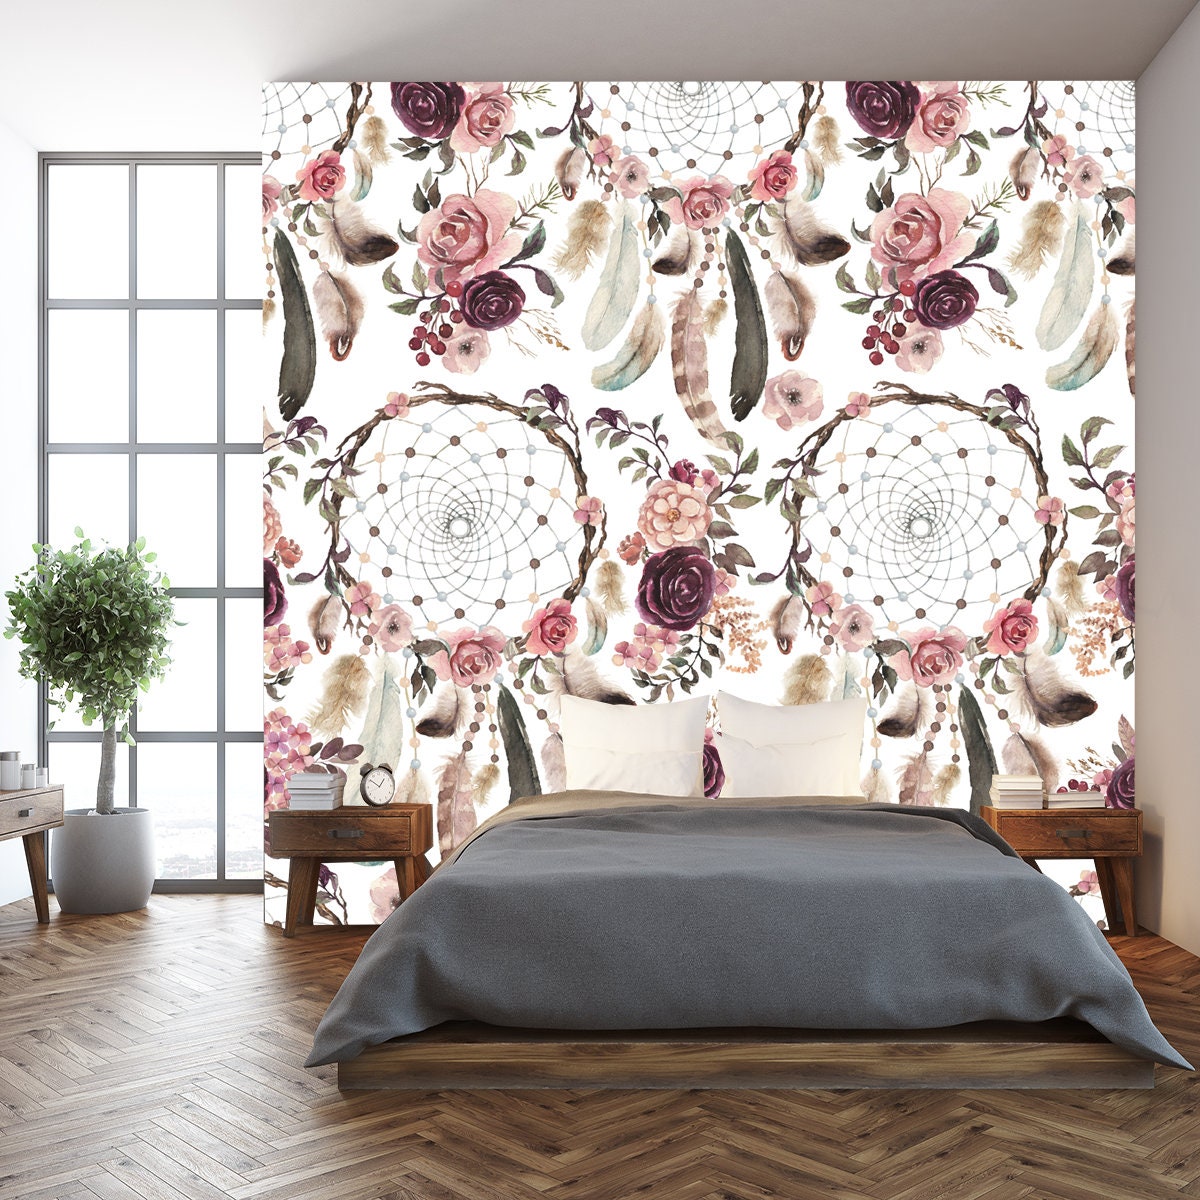 Seamless Watercolor Ethnic Boho Floral Pattern - Dream Catchers and Flowers, Native American Tribe Decoration Wallpaper Bedroom Mural